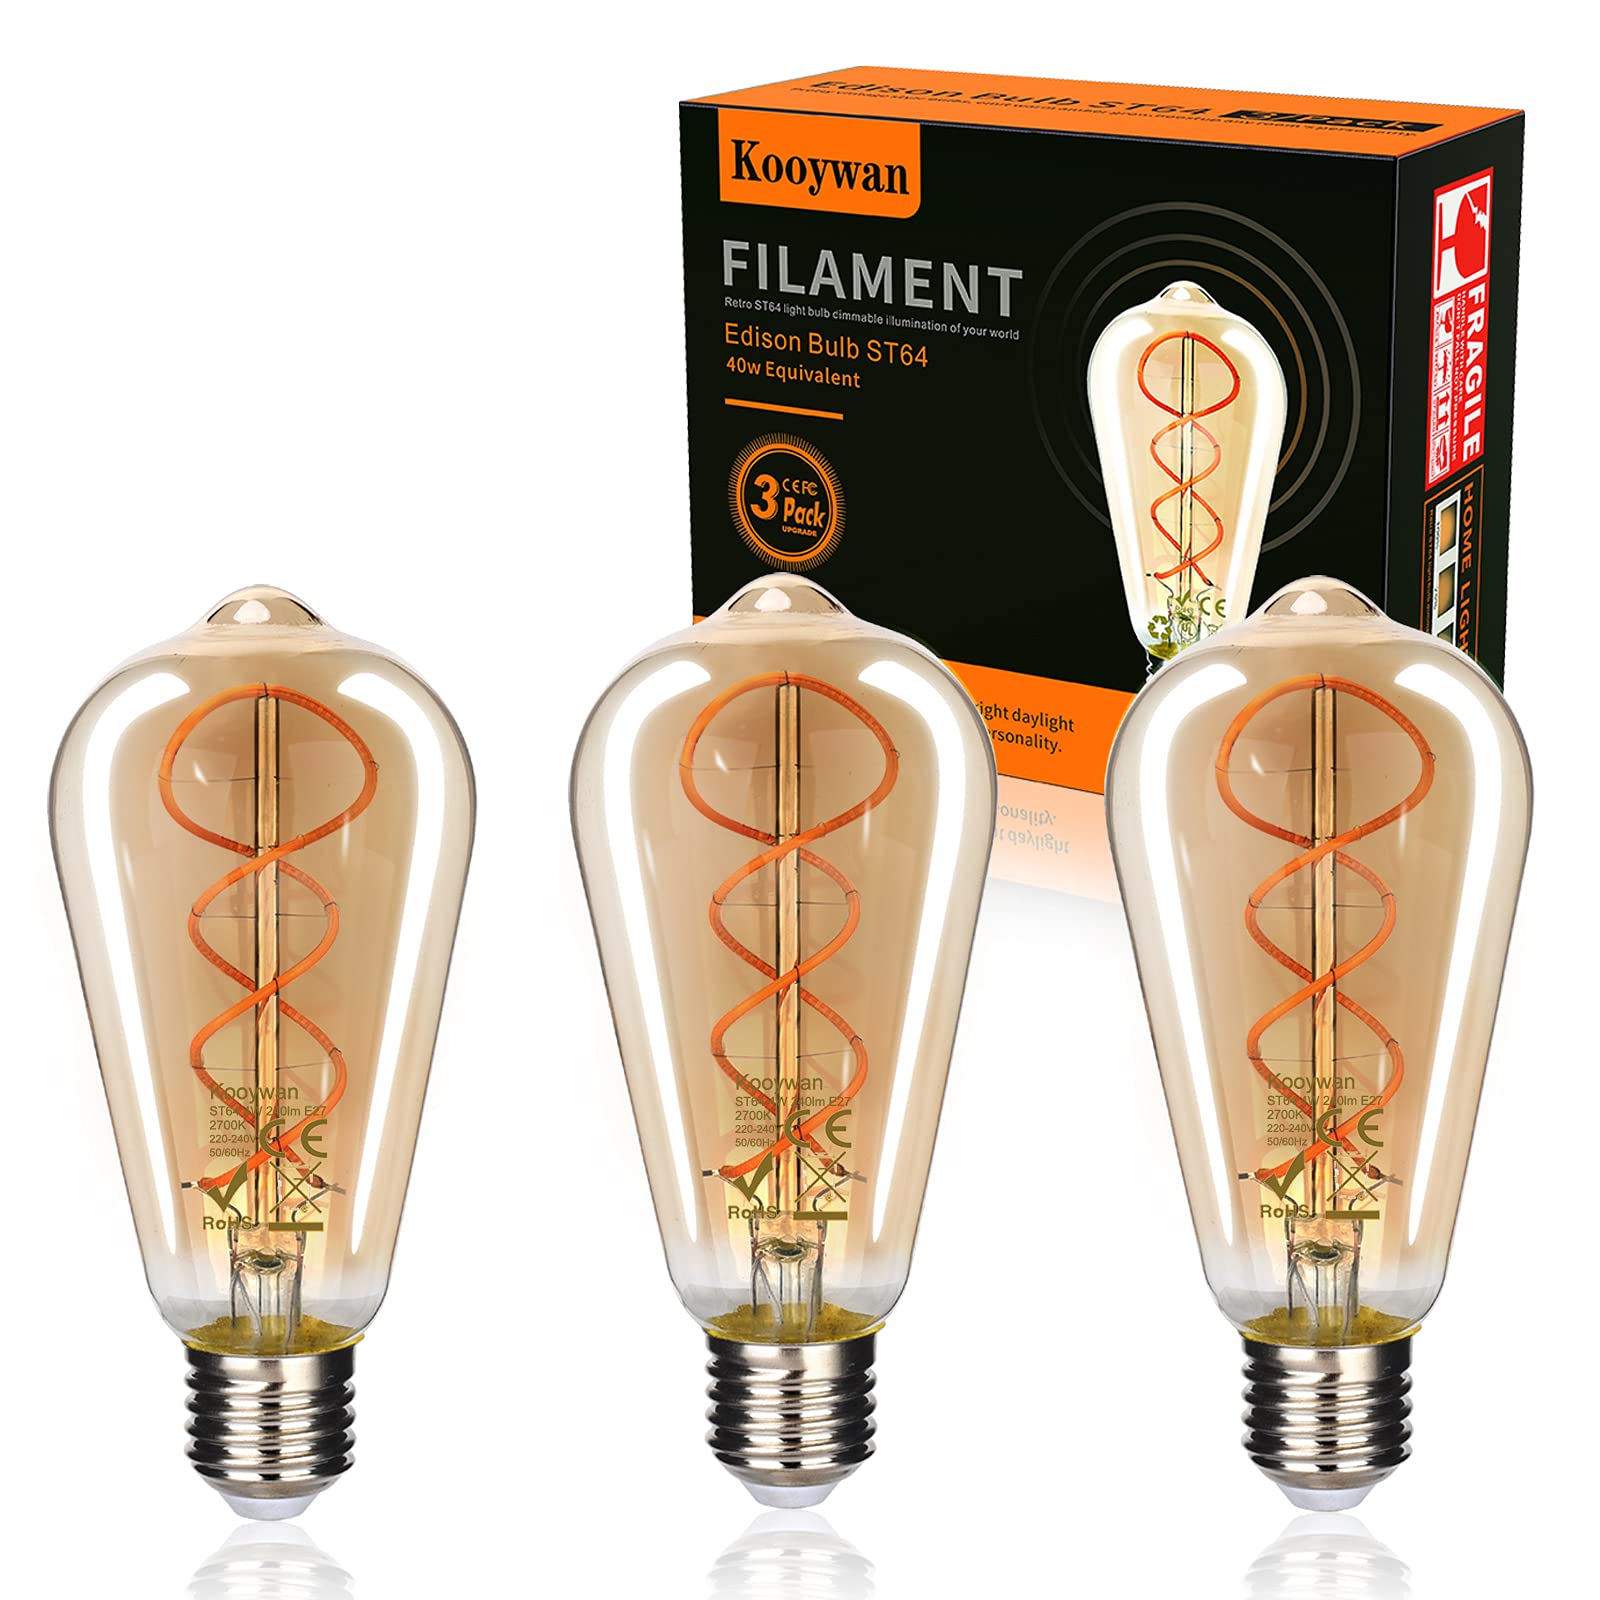 LED Bulb E27 Vintage Edison Light Screw Cap 4W(40W Equivalent) Dimmable 2700K Warm White,Squirrel Cage Flexible Spiral Filament ST64 400lm Decorative Retro Style Energy Saving Lightbulbs Pack of 3